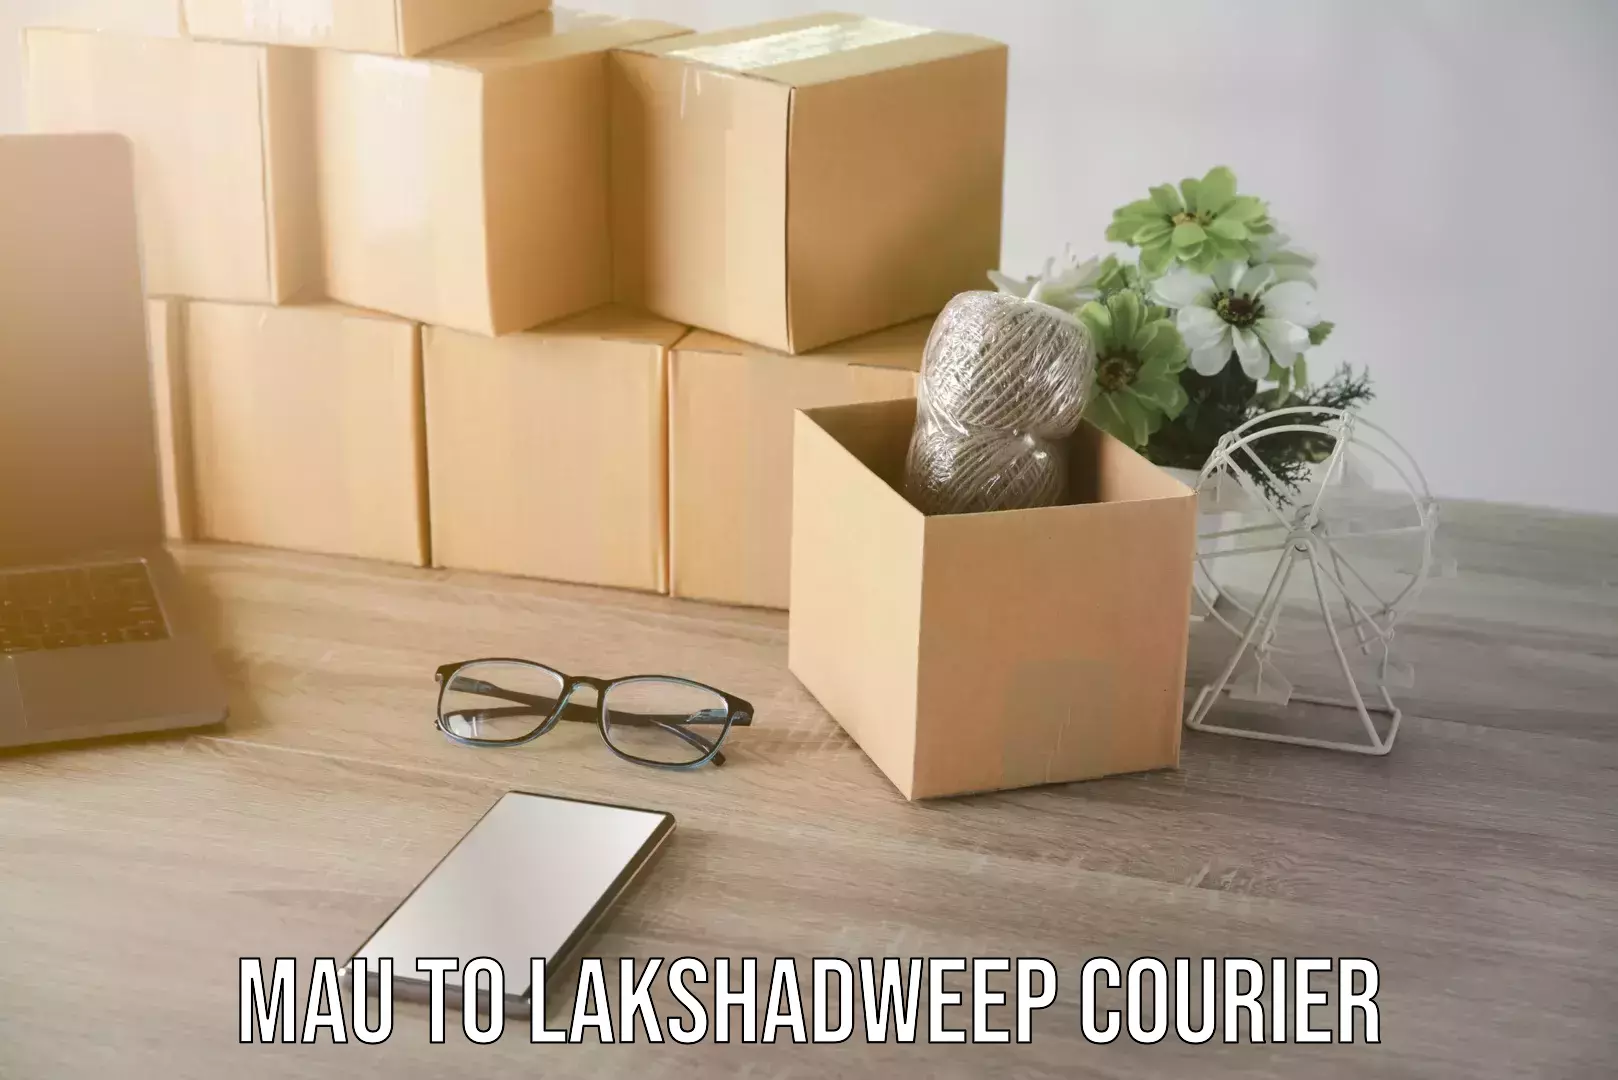 Hassle-free relocation in Mau to Lakshadweep